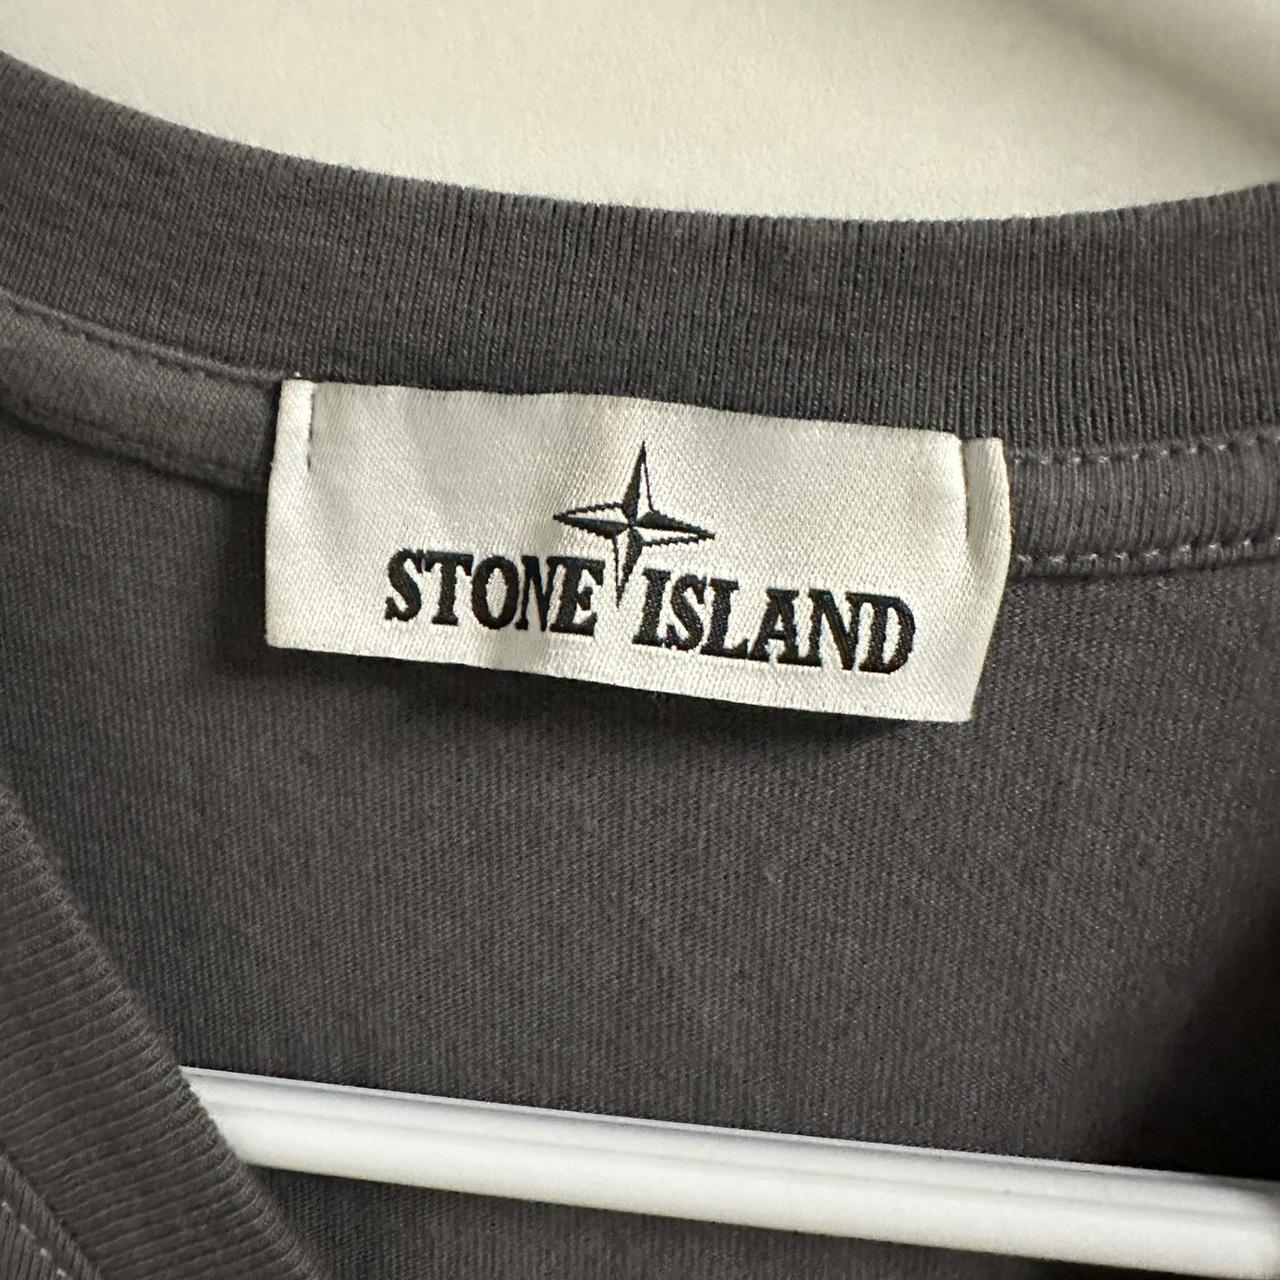 Stone Island Men's Grey and Silver T-shirt (5)